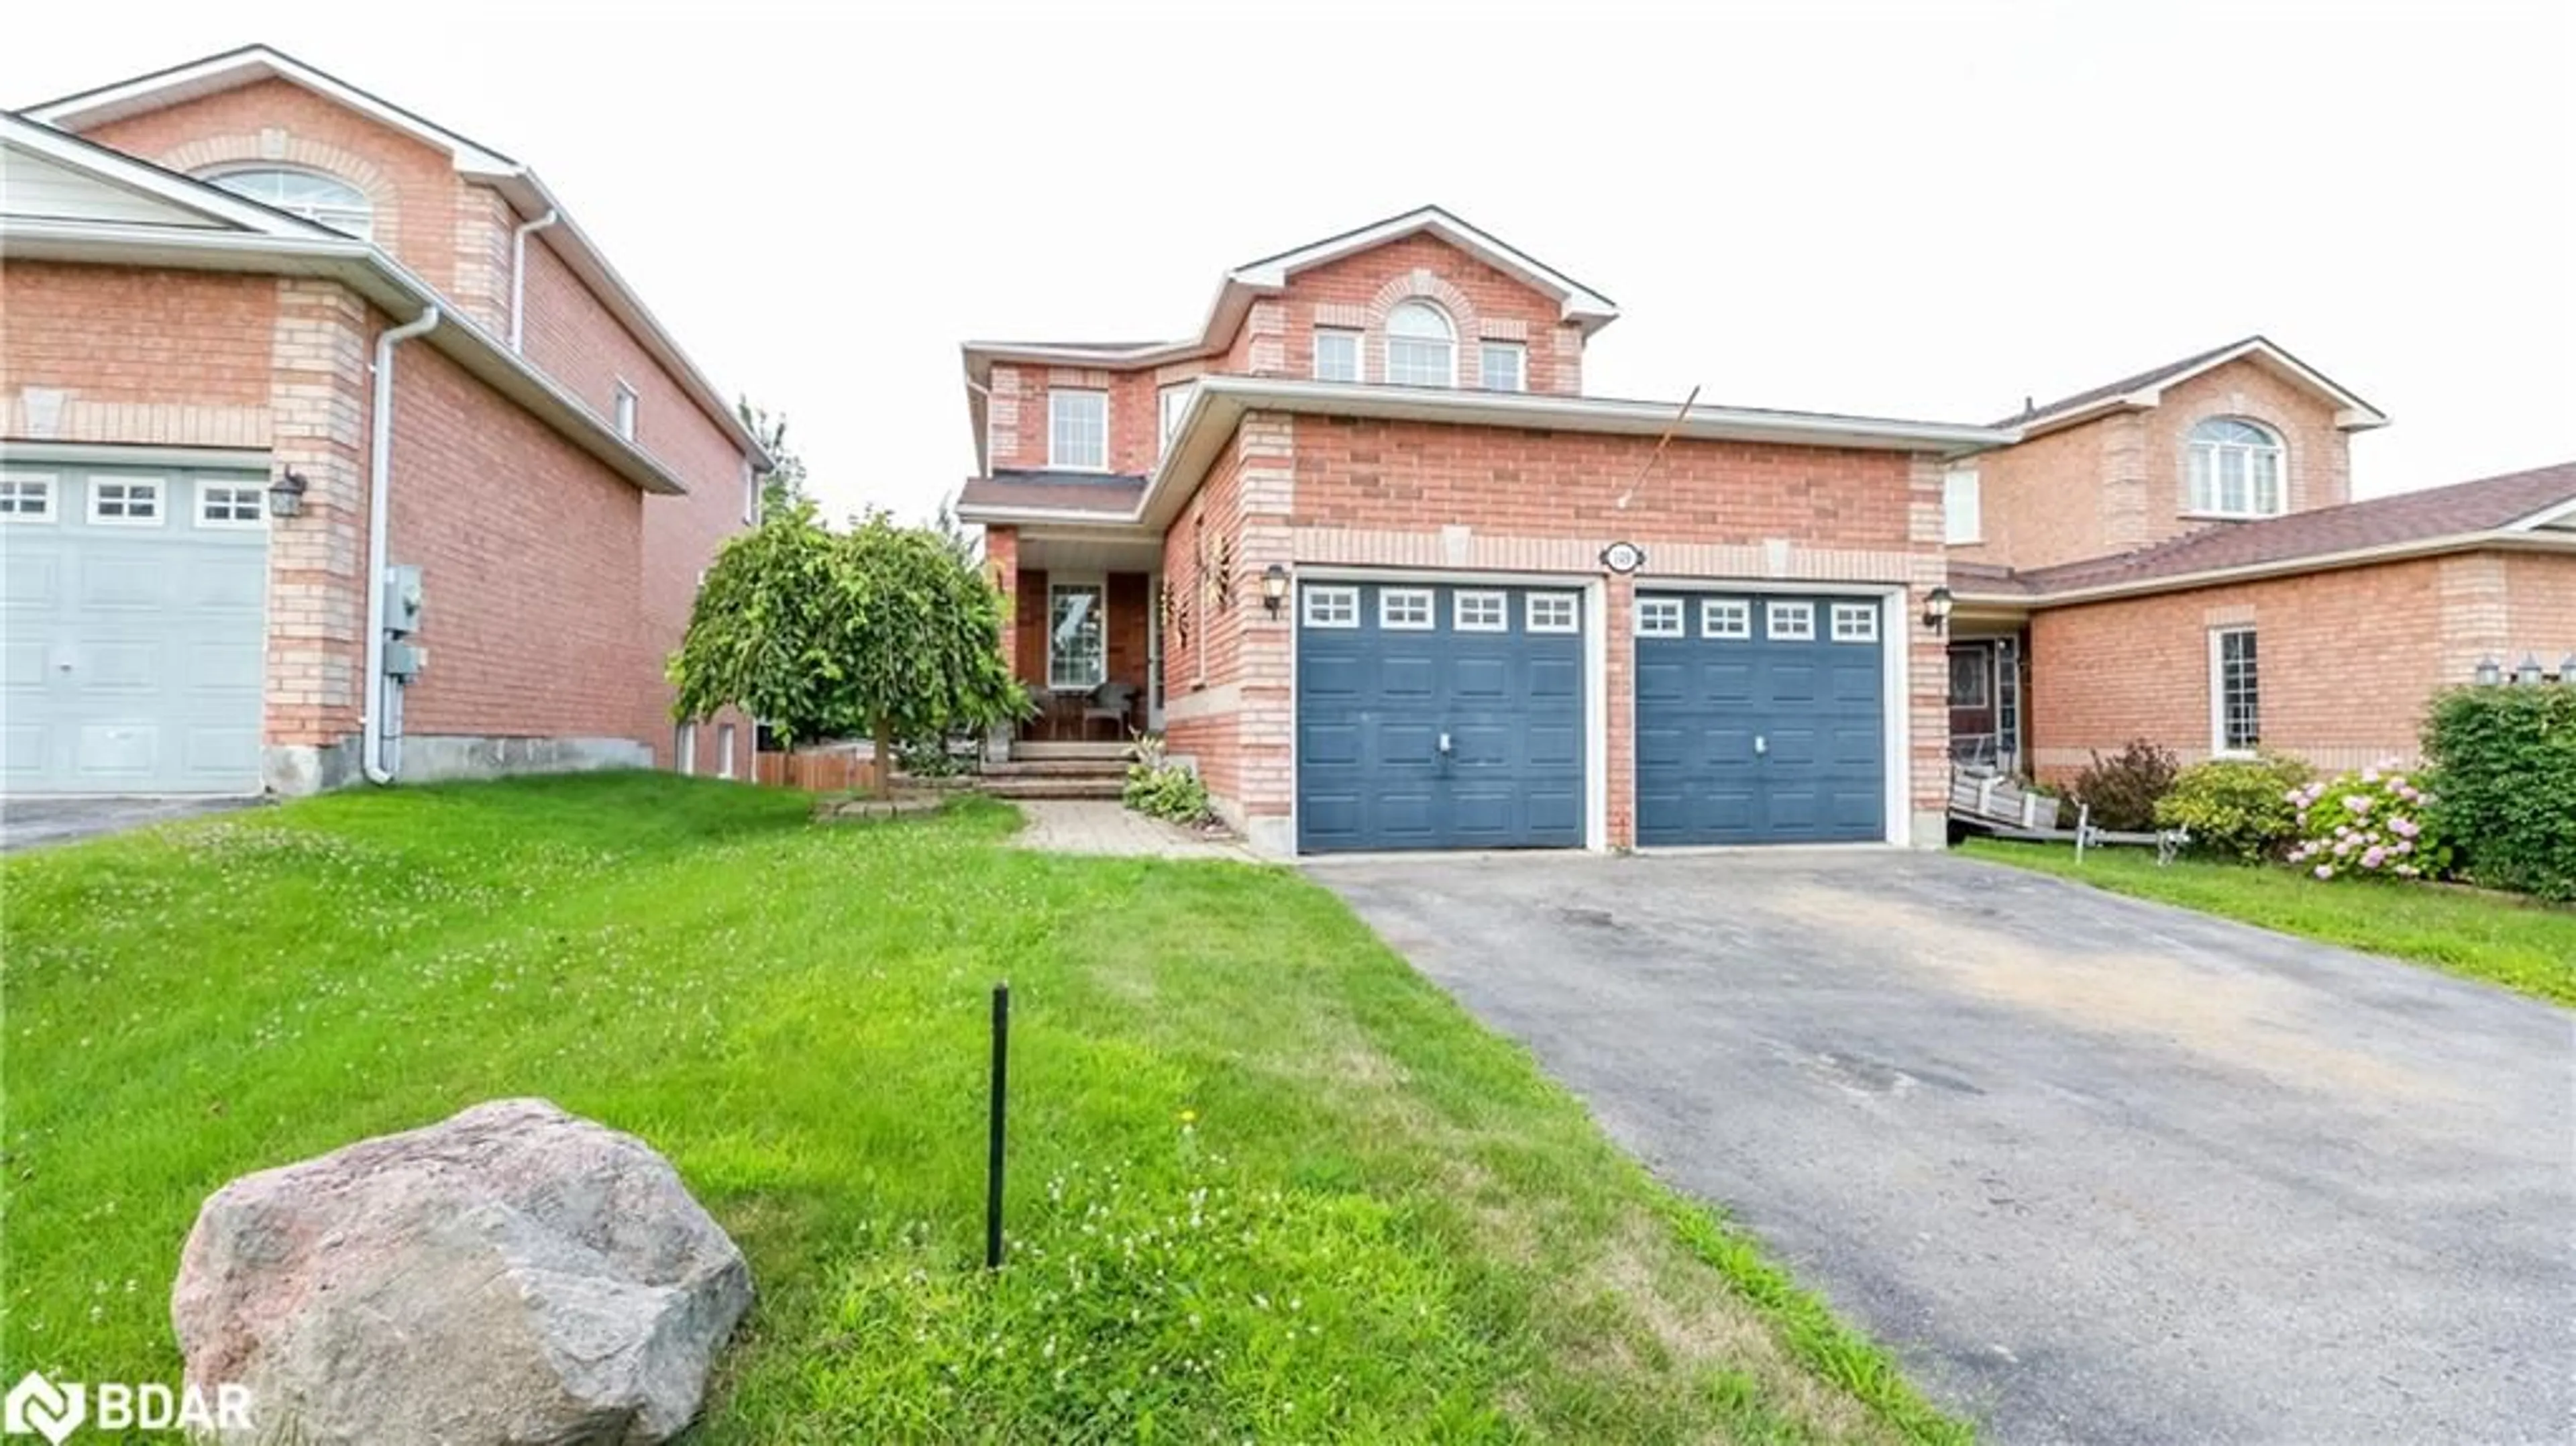 Home with brick exterior material for 149 Cunningham Dr, Barrie Ontario L4N 5R3